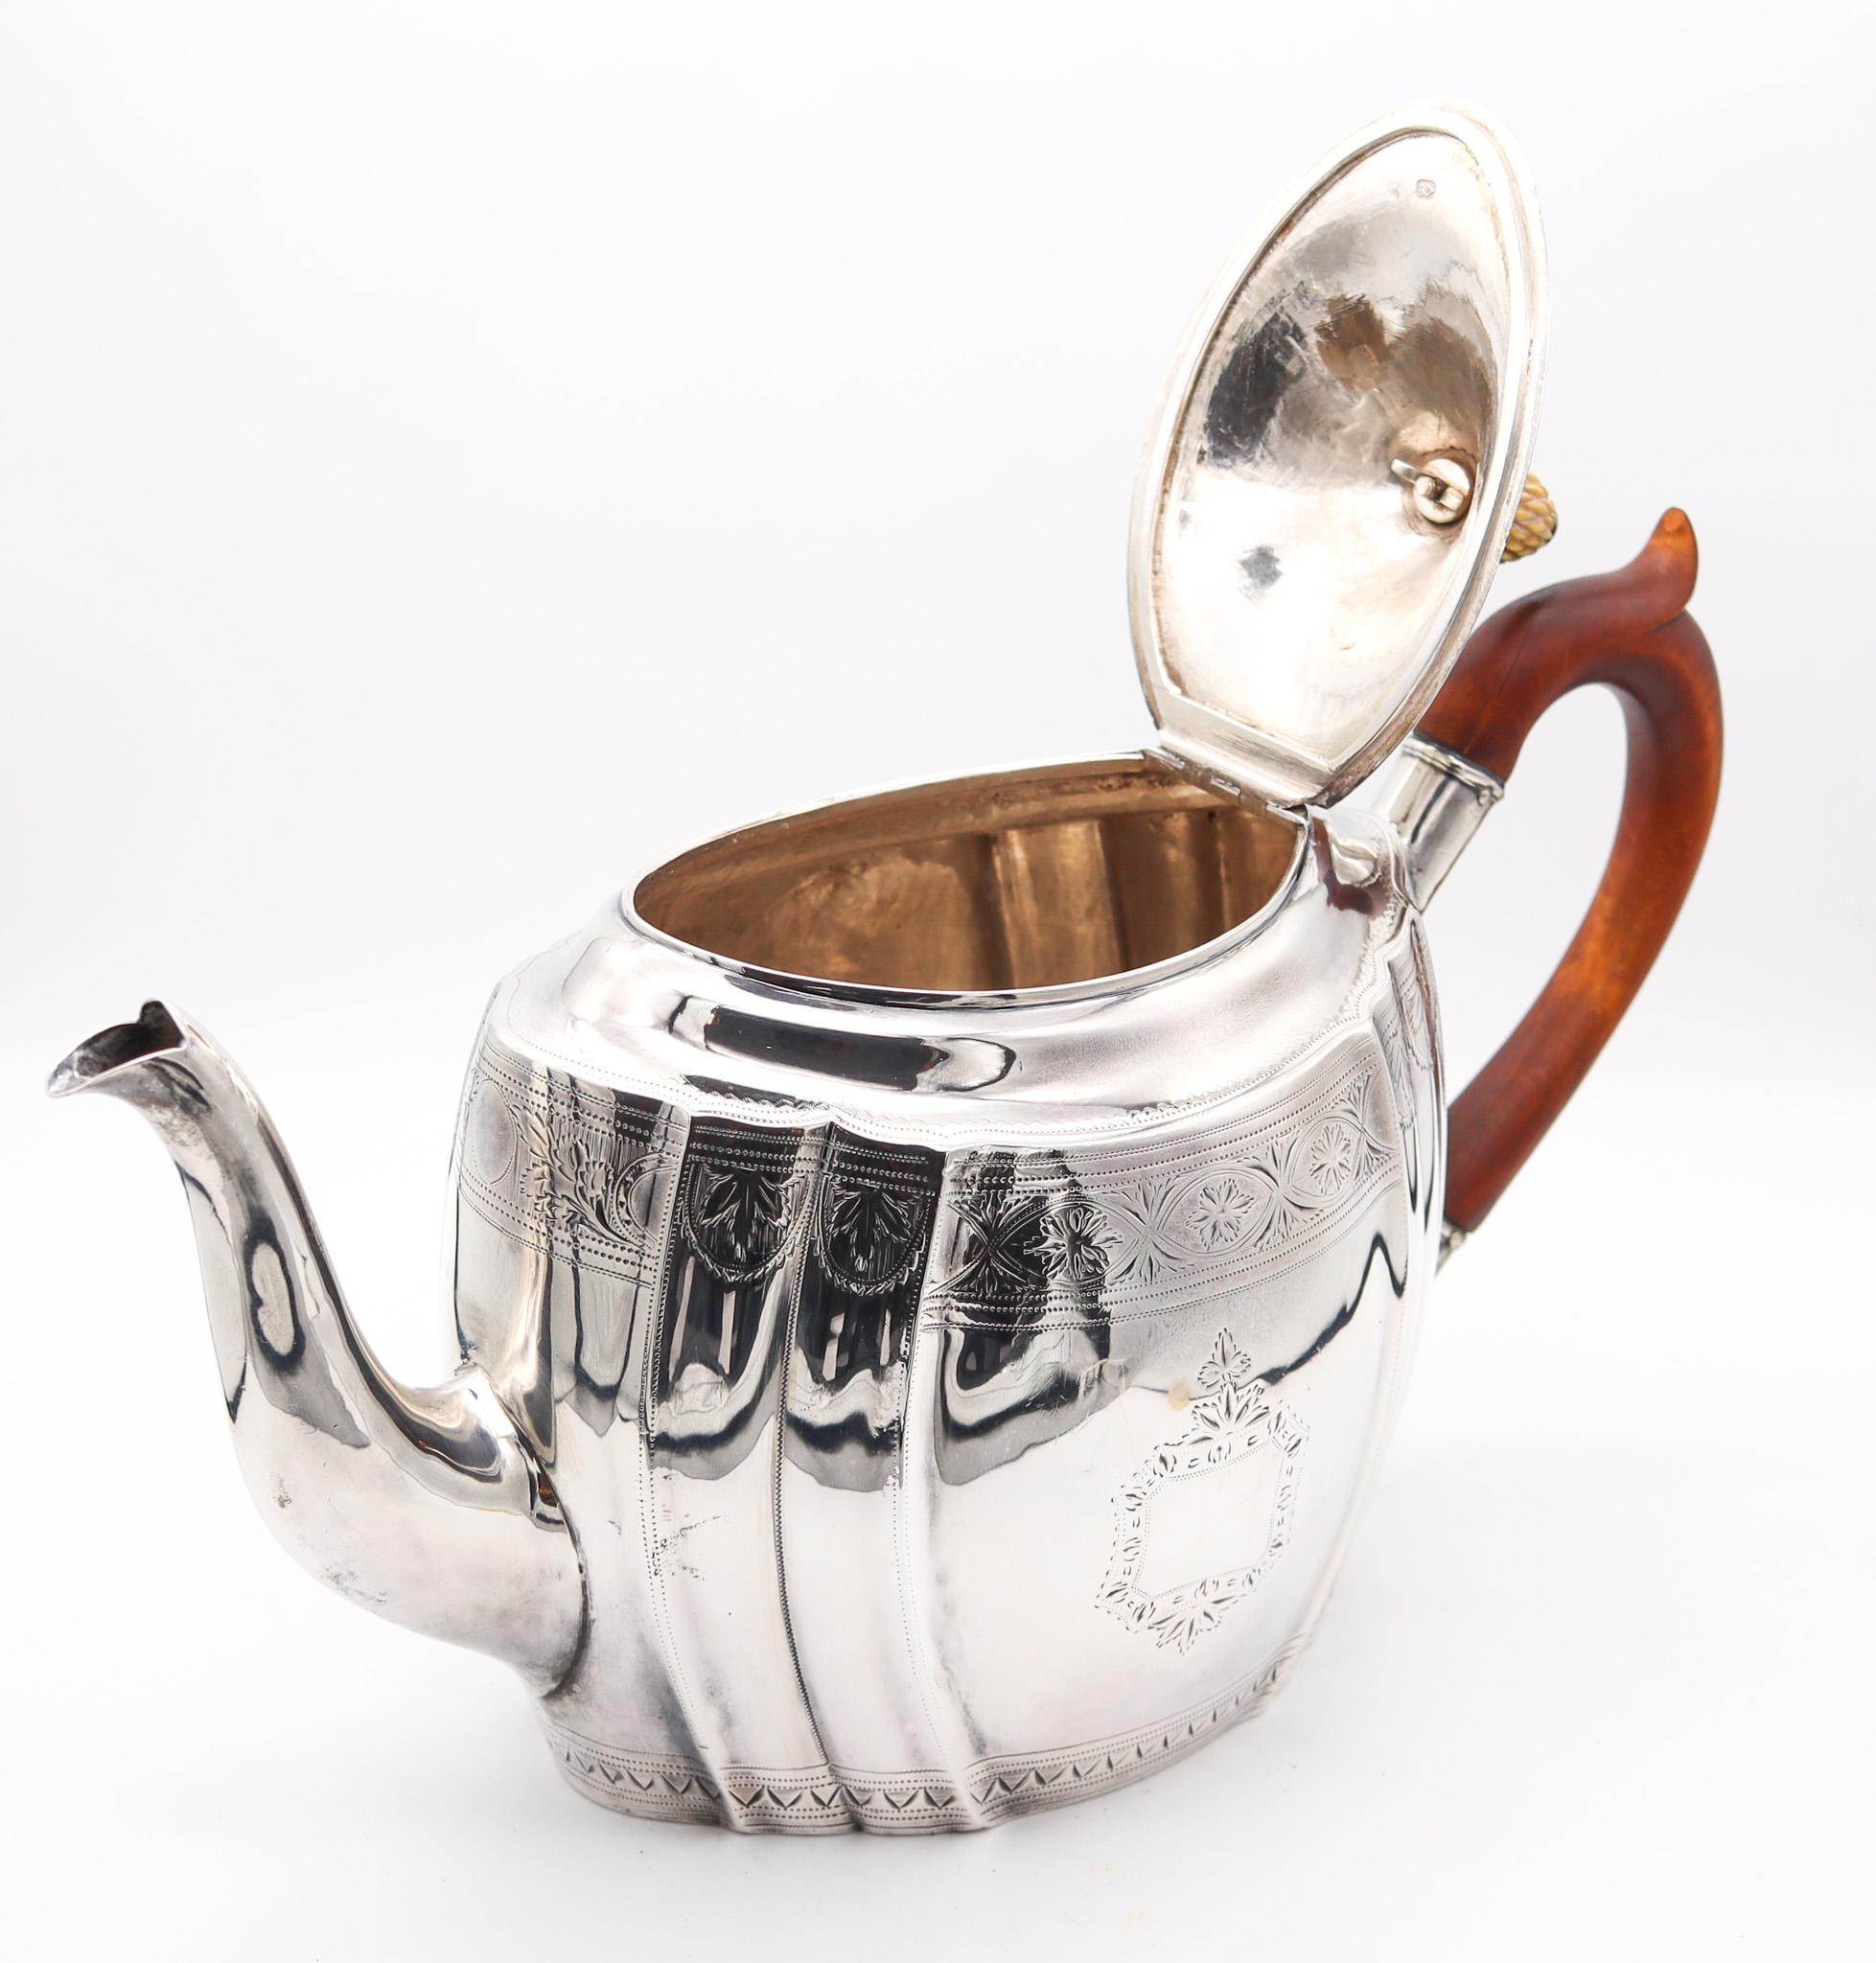 Engraved Richard Sawyer 1801 Dublin Coffee-Tea Pot In 925 Sterling Silver With Brown Wood For Sale